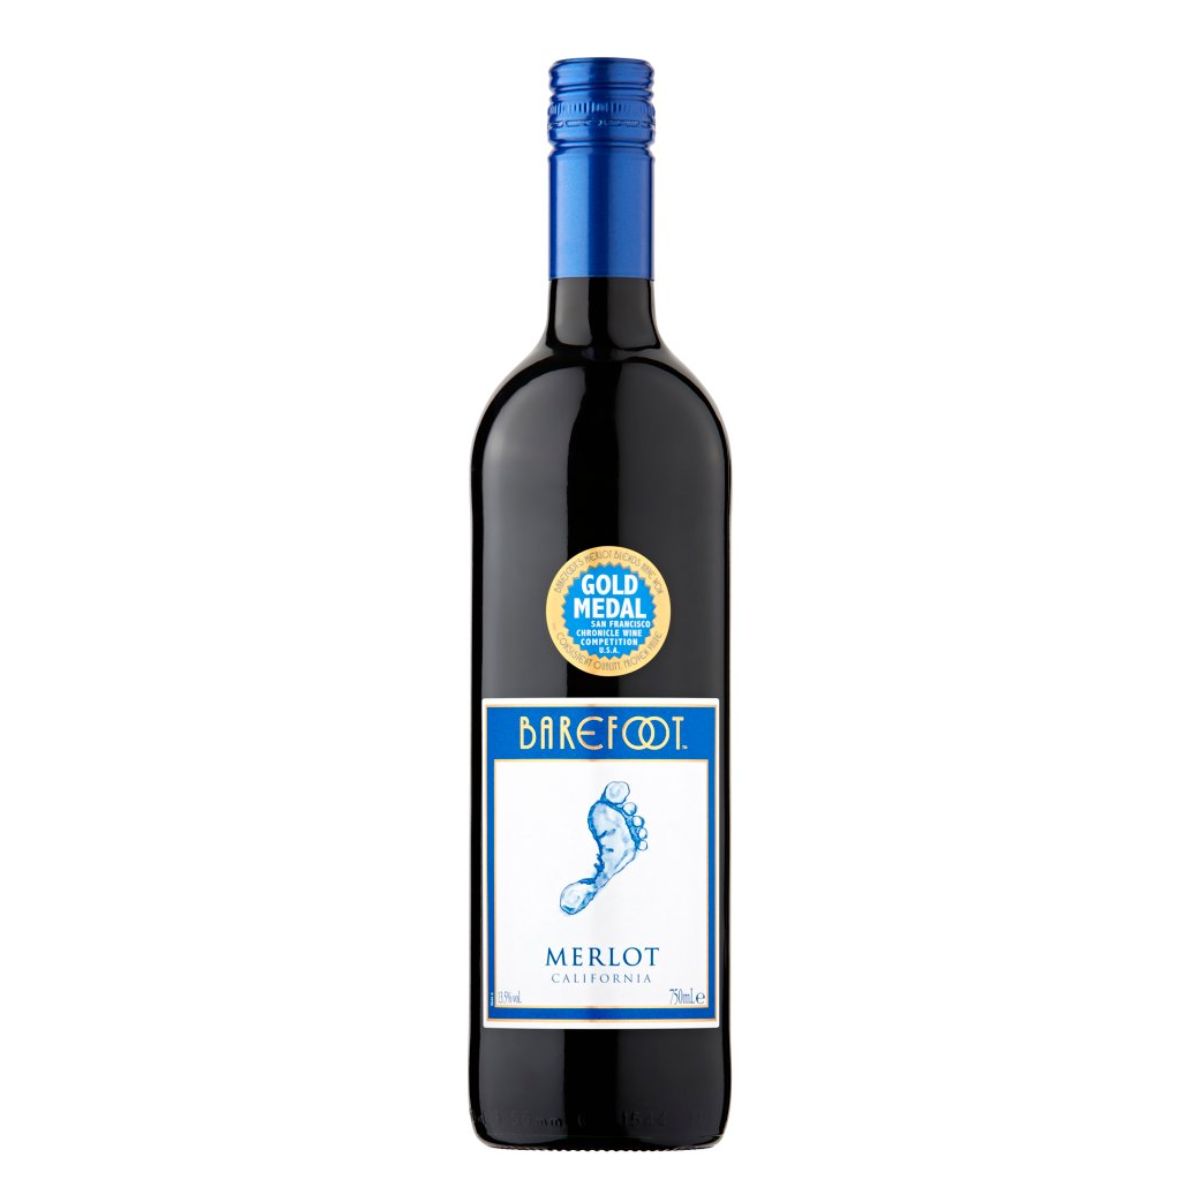 A bottle of Barefoot - Merlot Red Wine (13.5% ABV) - 750ml with a blue label.